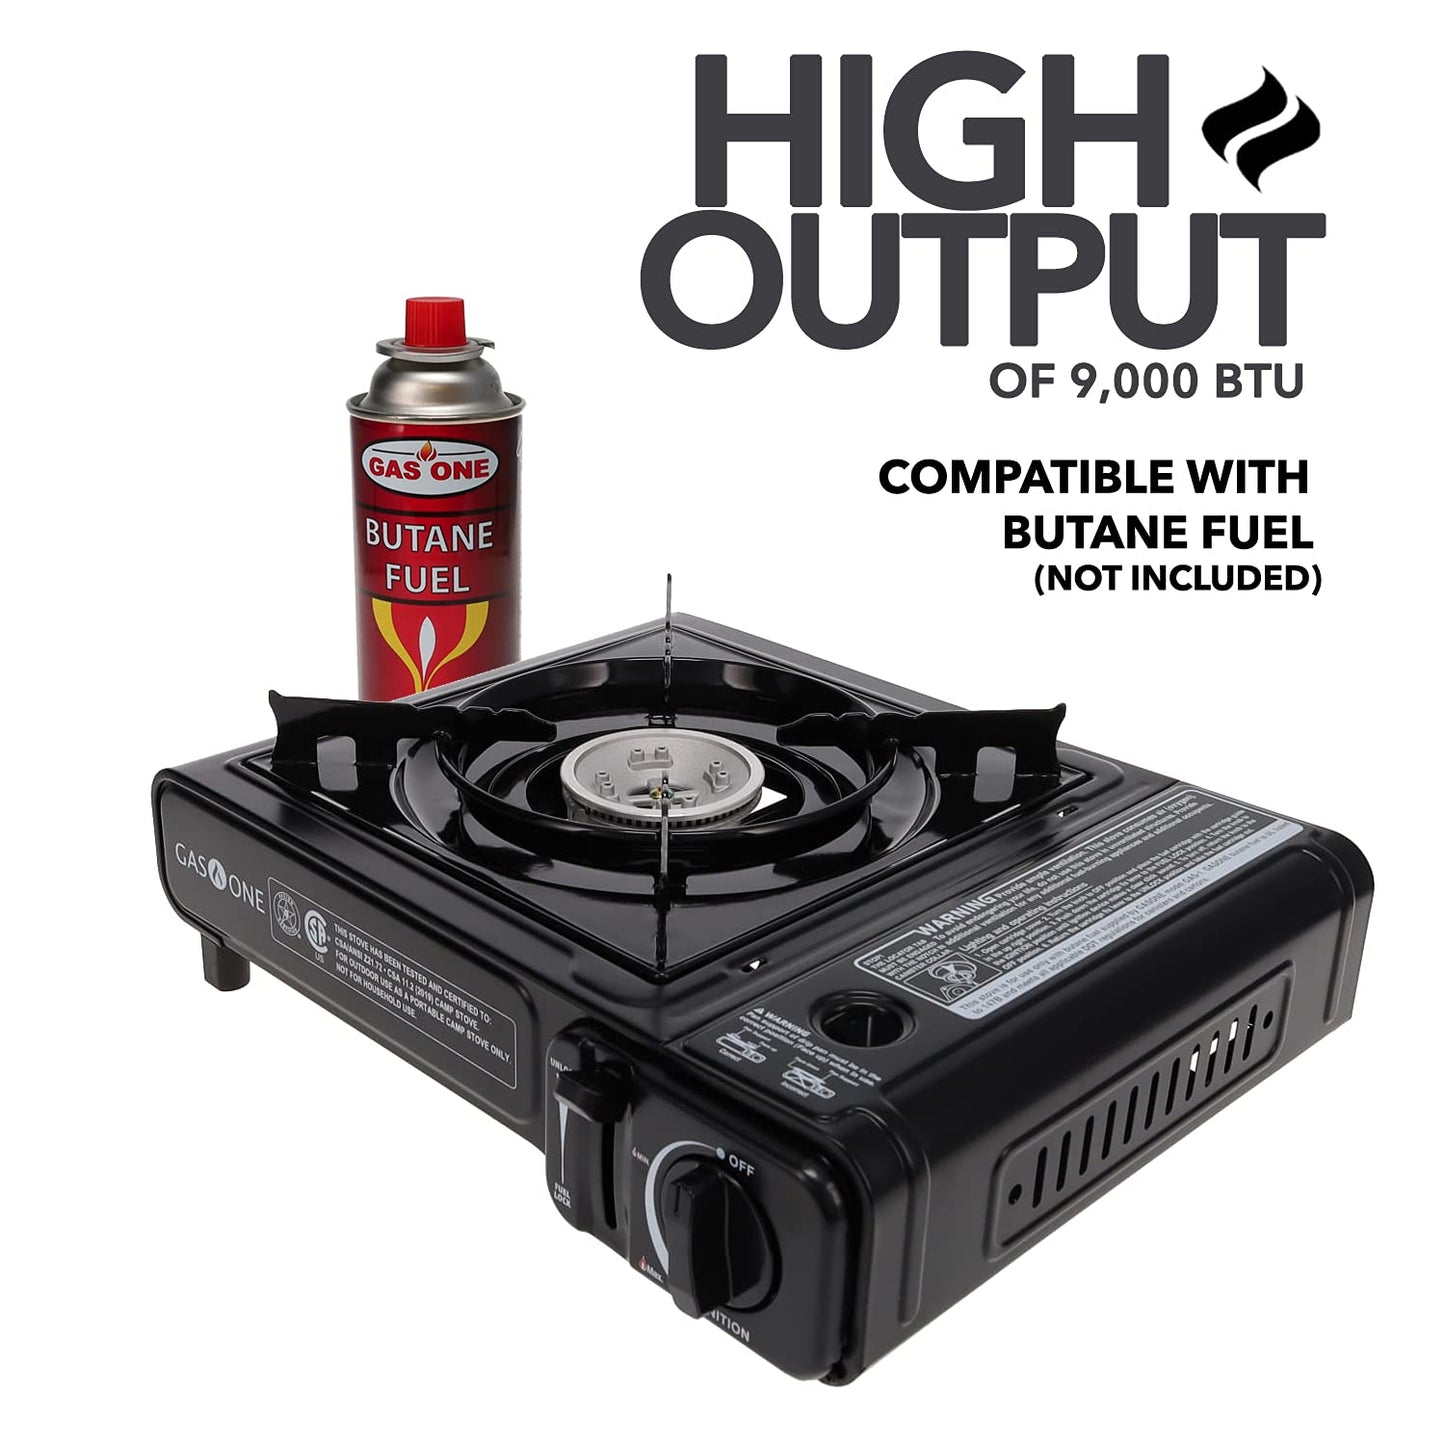 GAS ONE GS-3000 Portable Gas Stove with Carrying Case, 9,000 BTU, CSA Approved, Black, 11.2" H x 4.4" W x 13.5" L